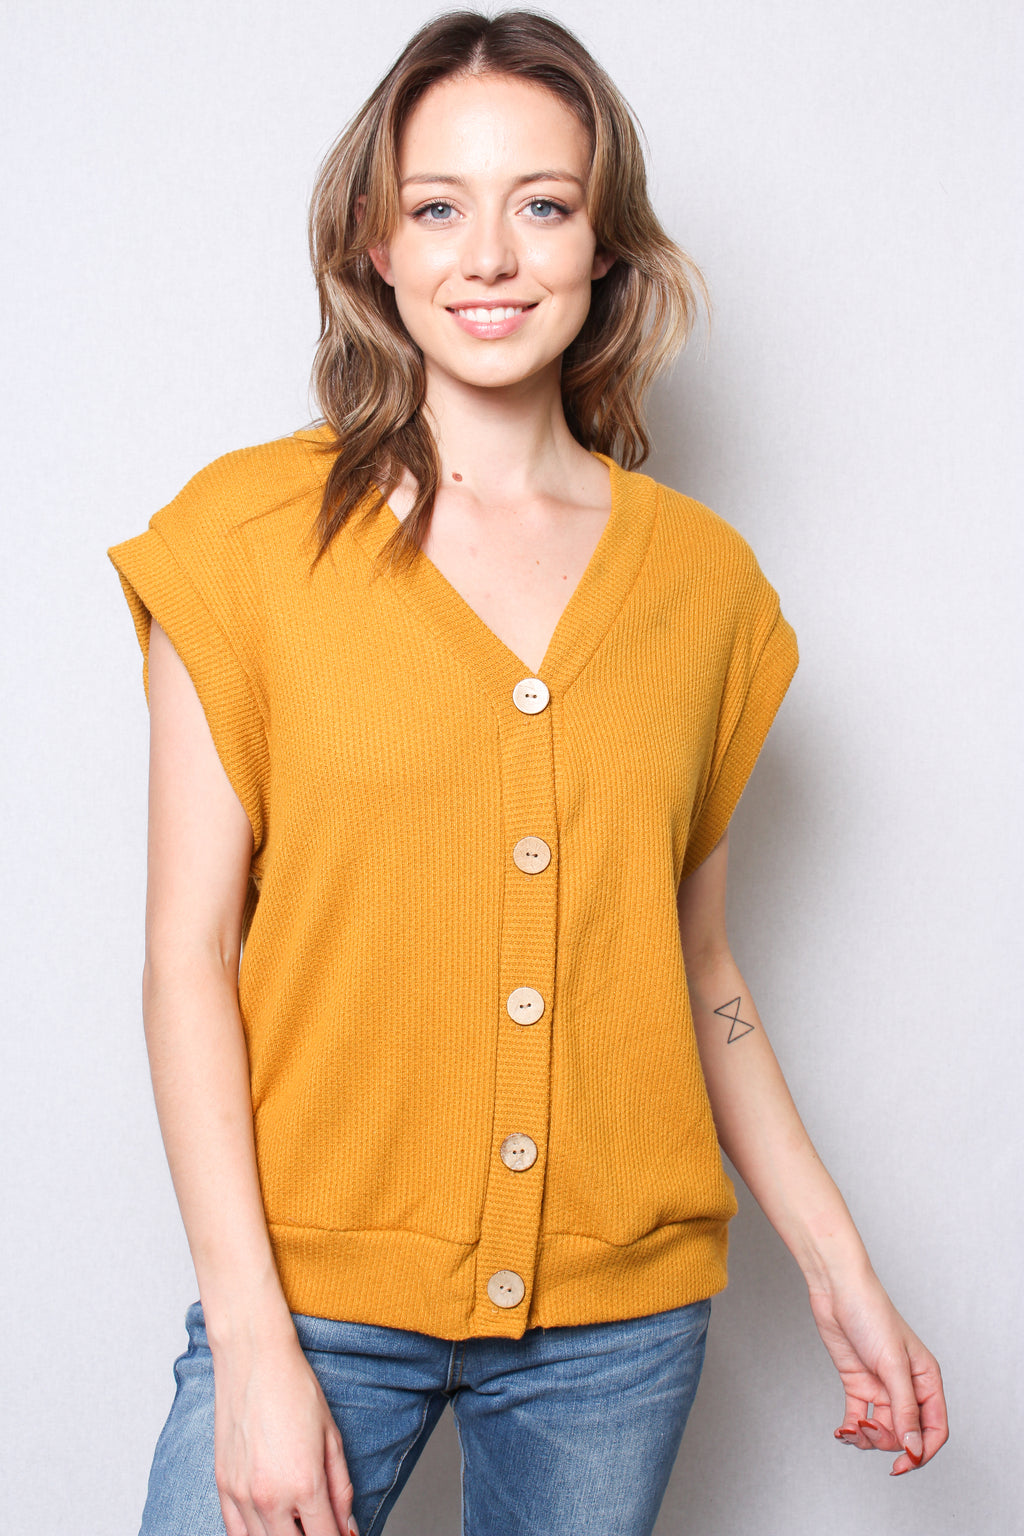 Women's Knitted Button Front Sweater Vest Top